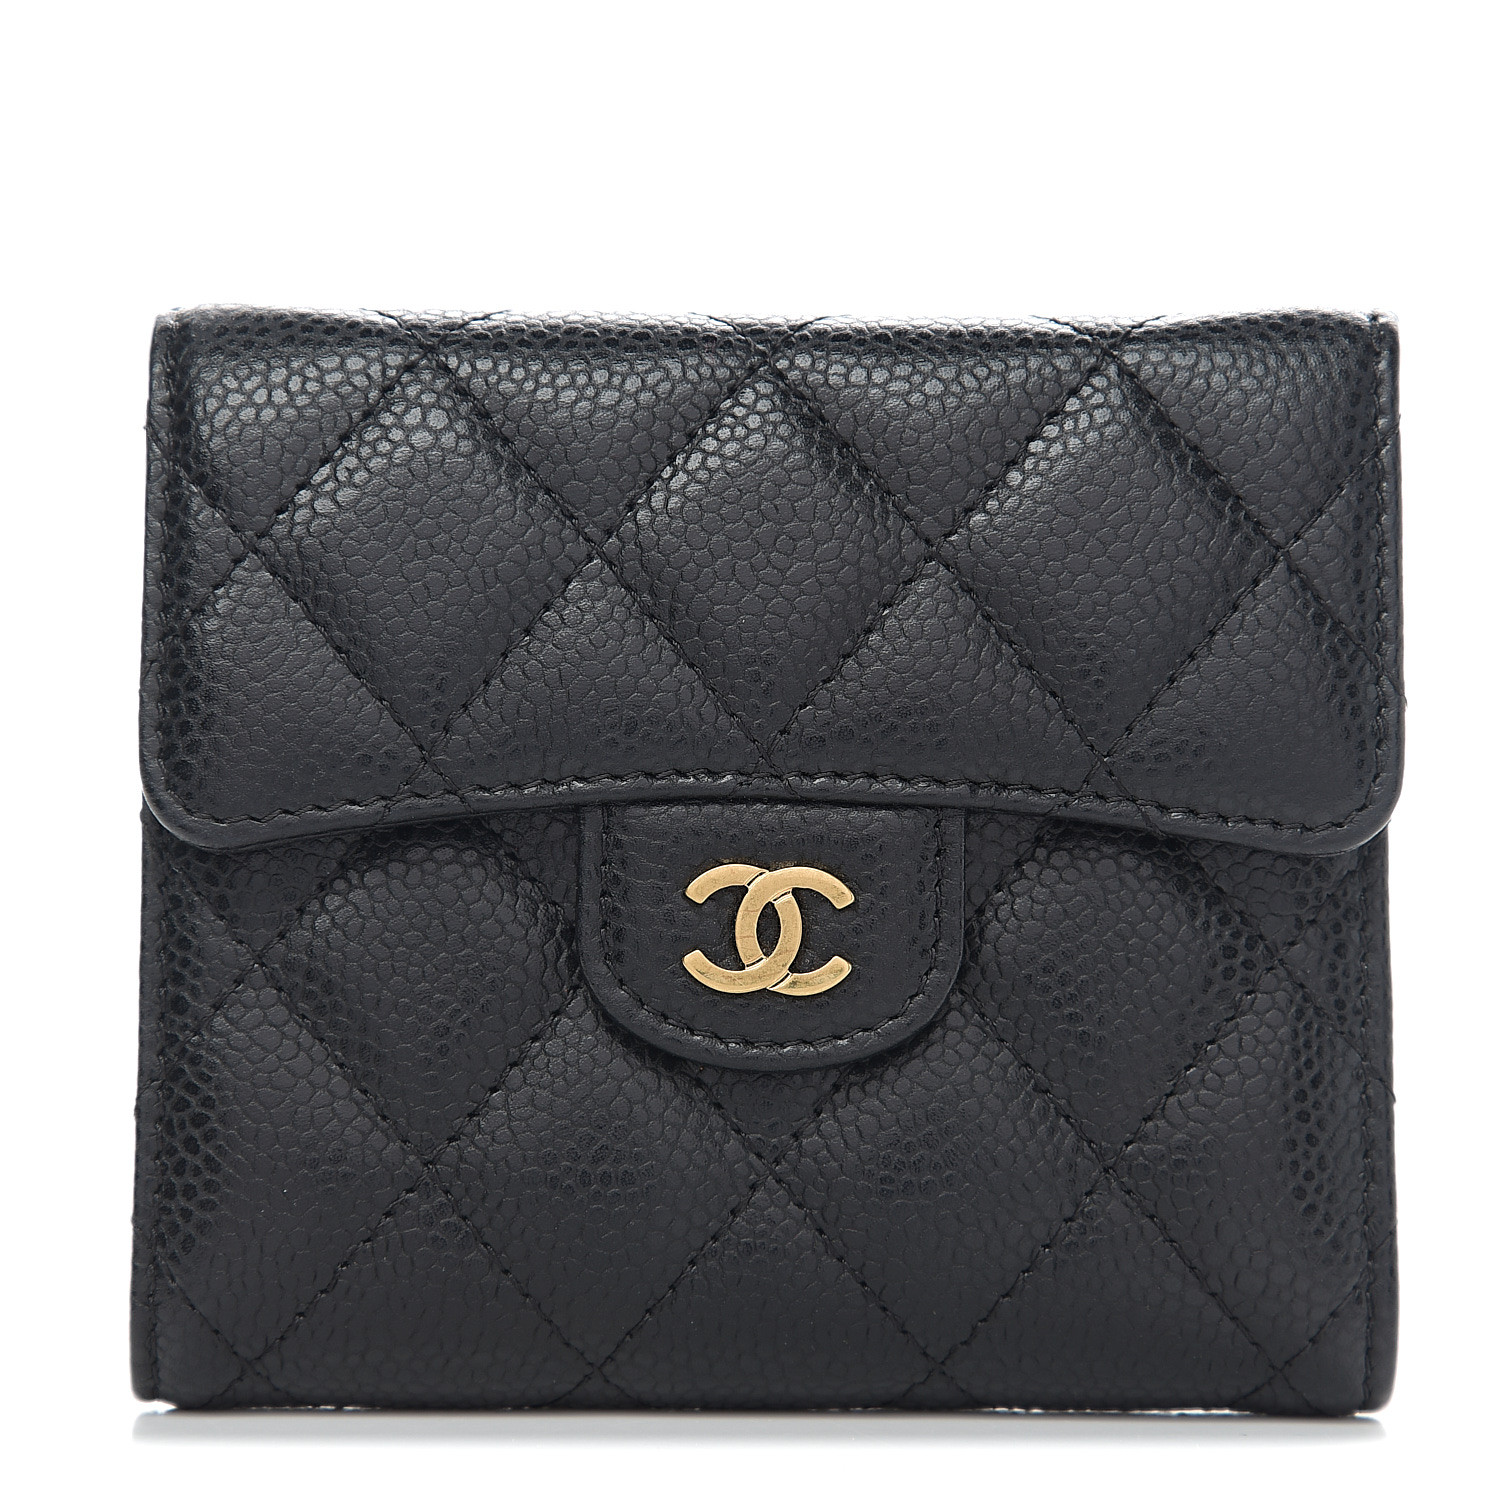 CHANEL Caviar Quilted Compact Flap Wallet Black 567899